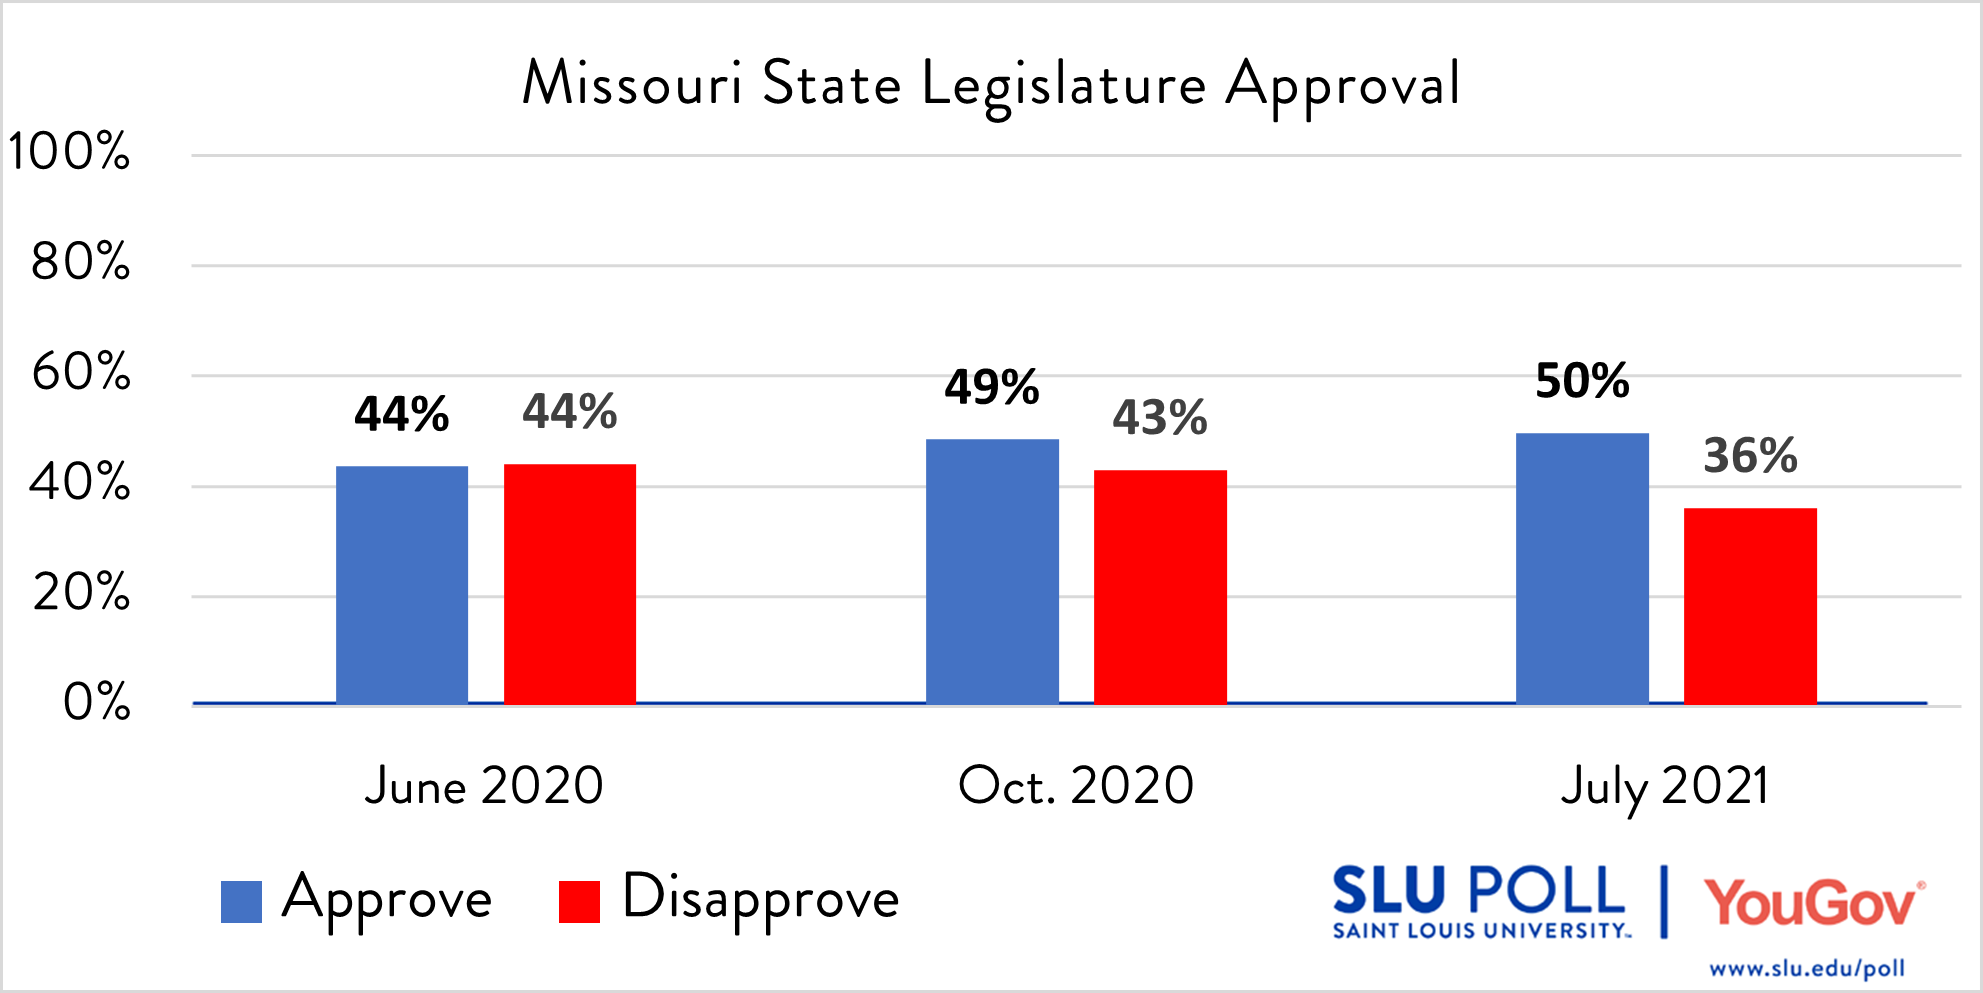 Do you approve or disapprove of the way each is doing their job…The Missouri State Legislature?  - Strongly Approve: 5% - Approve: 44% - Disapprove: 16% - Strongly Disapprove: 20%  - Not Sure: 14% Subsample Question: The sample size for this question is 477. The margin of error for the full results for the above question is ± 6.02%.